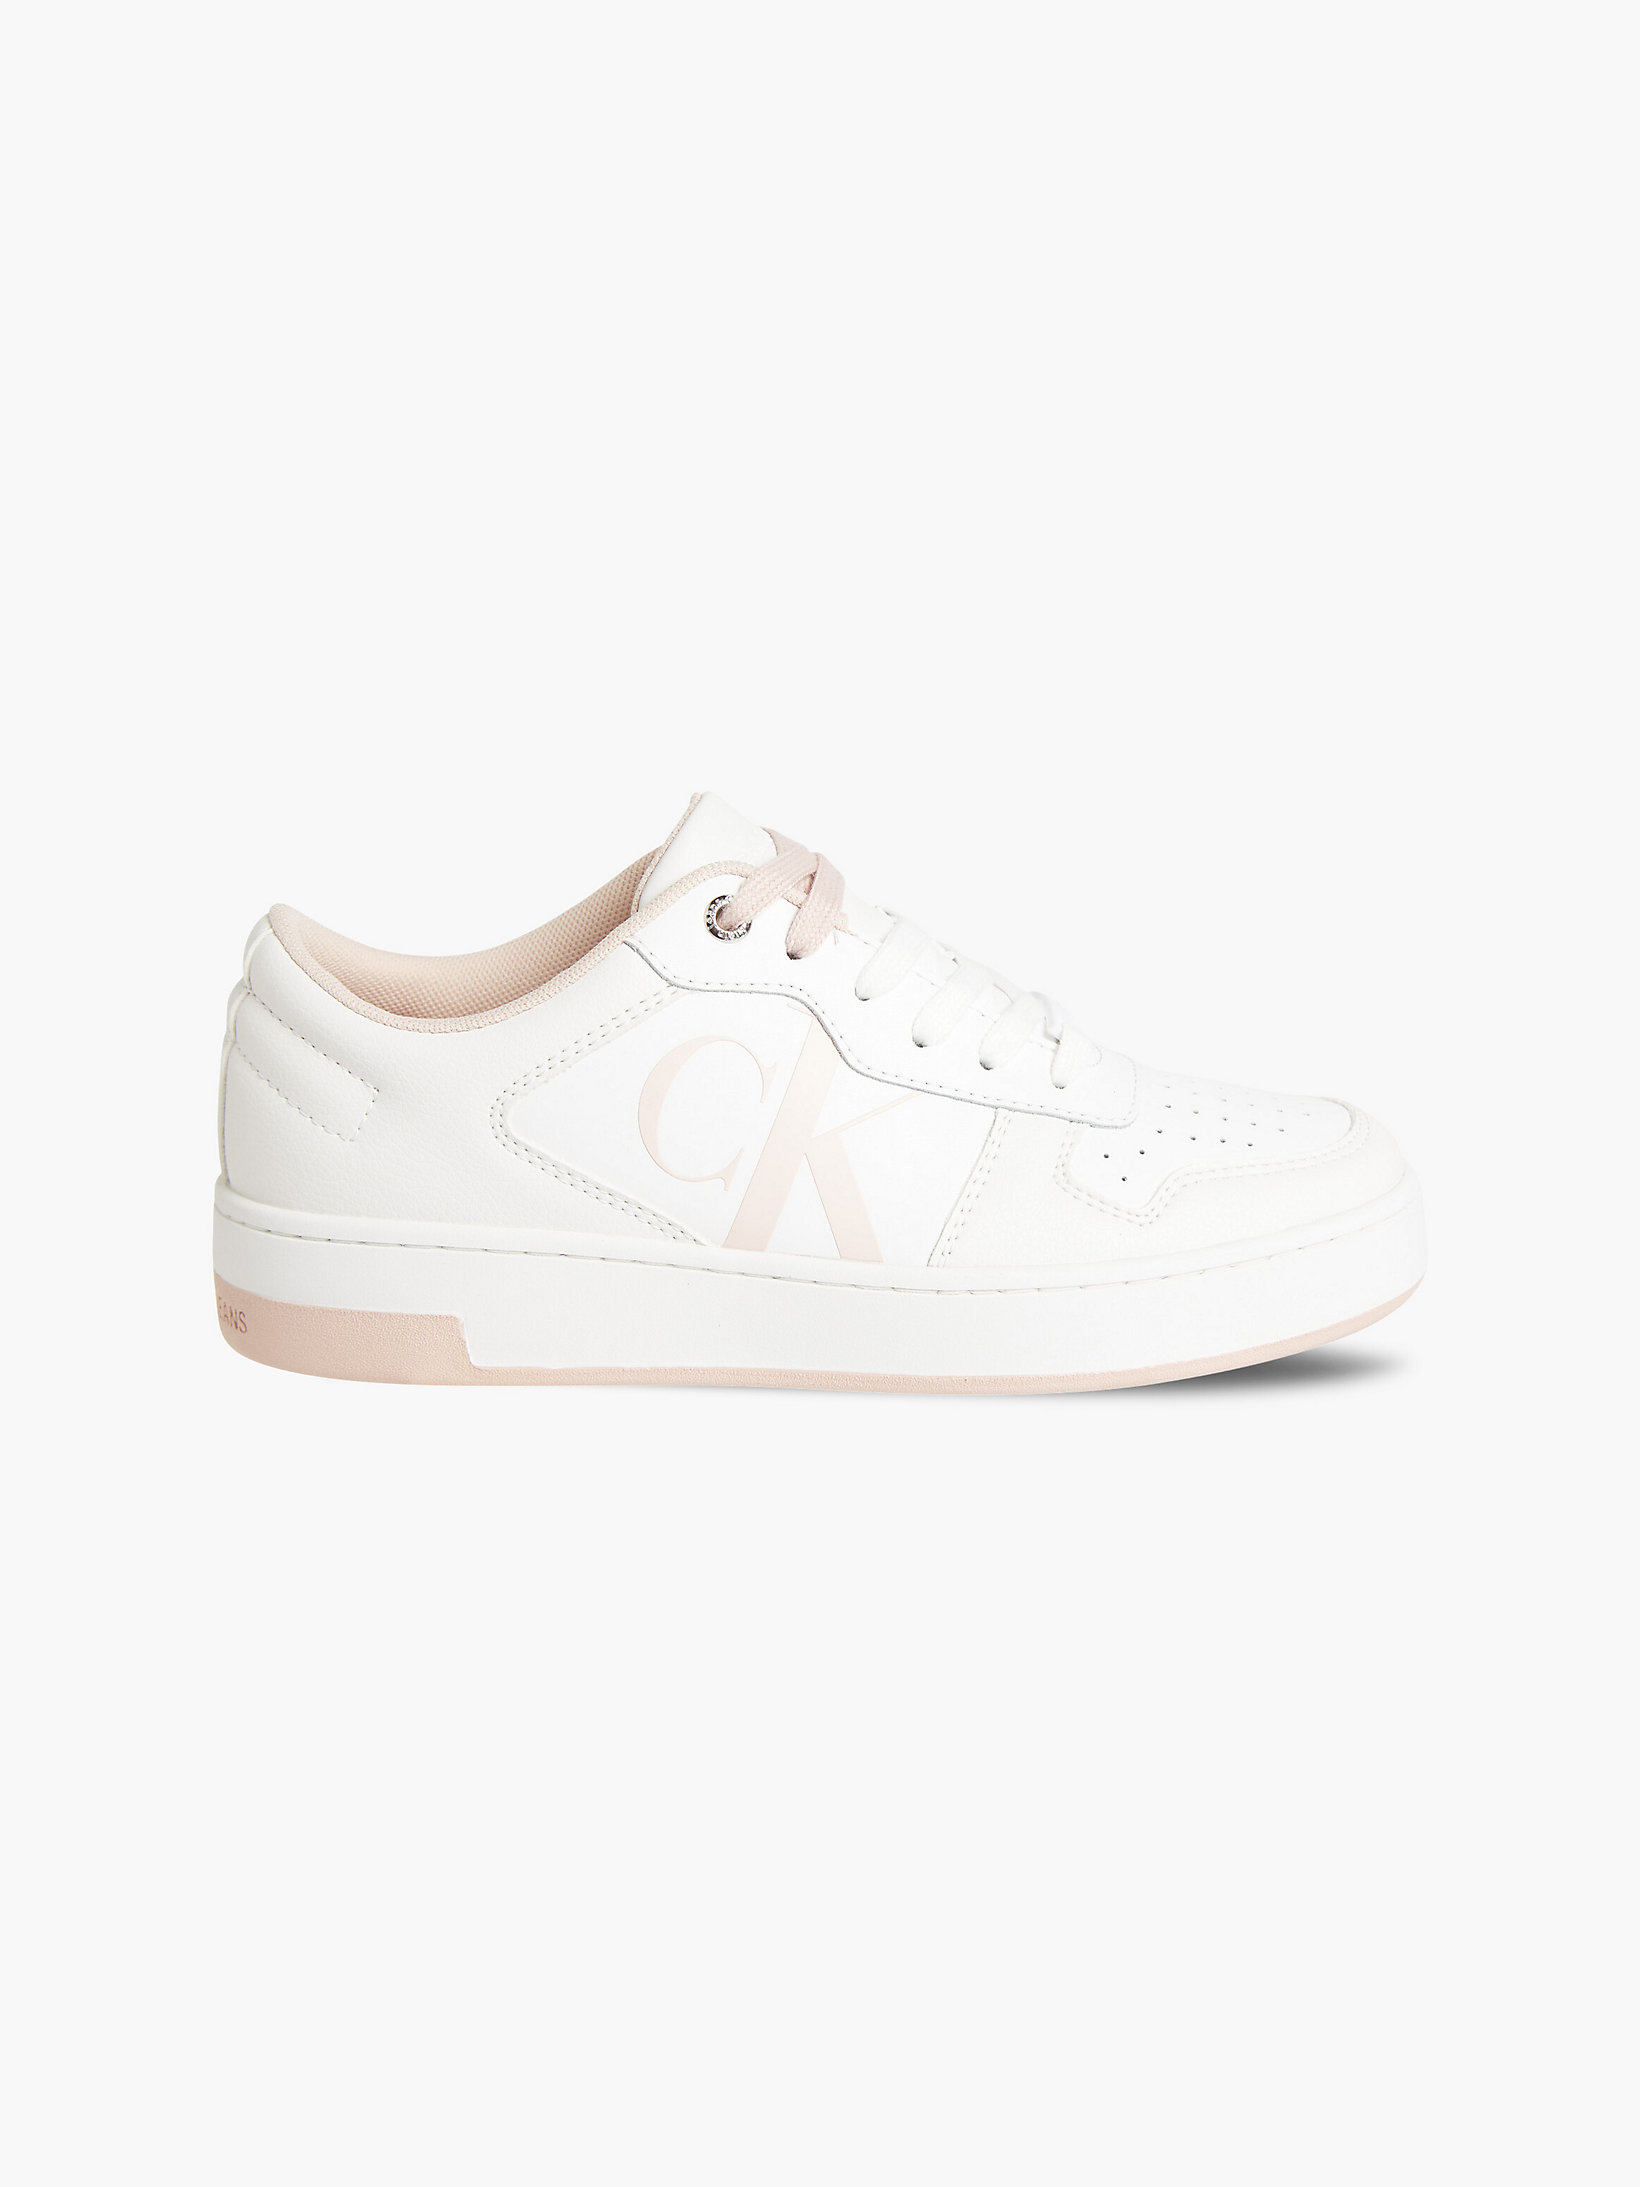 White/pink Blush Leather Trainers undefined women Calvin Klein